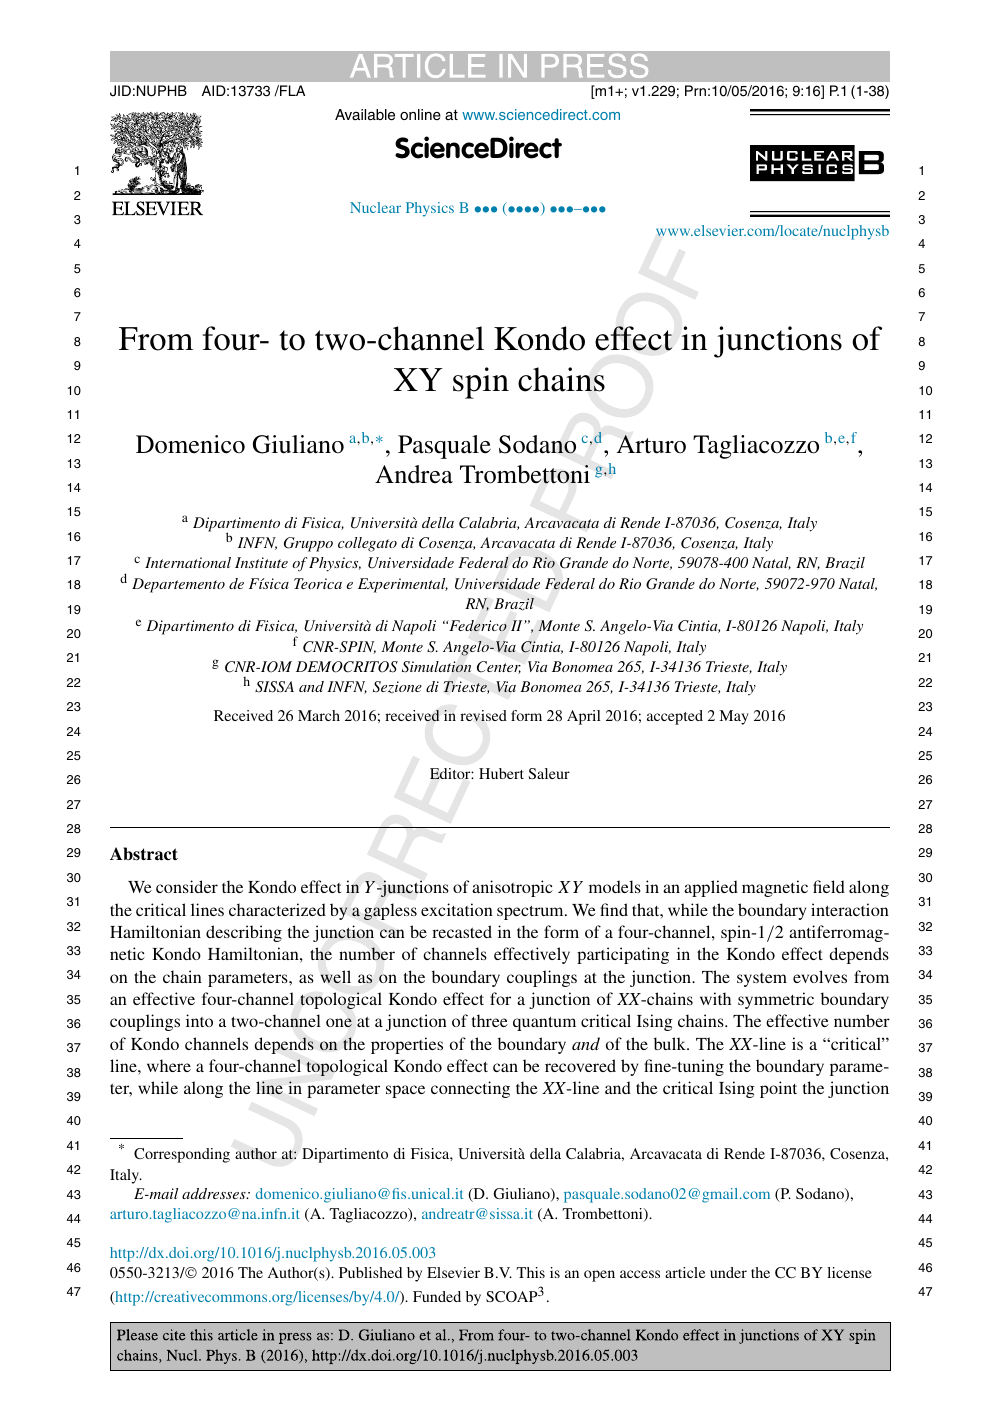 From Four To Two Channel Kondo Effect In Junctions Of Xy Spin Chains Topic Of Research Paper In Physical Sciences Download Scholarly Article Pdf And Read For Free On Cyberleninka Open Science